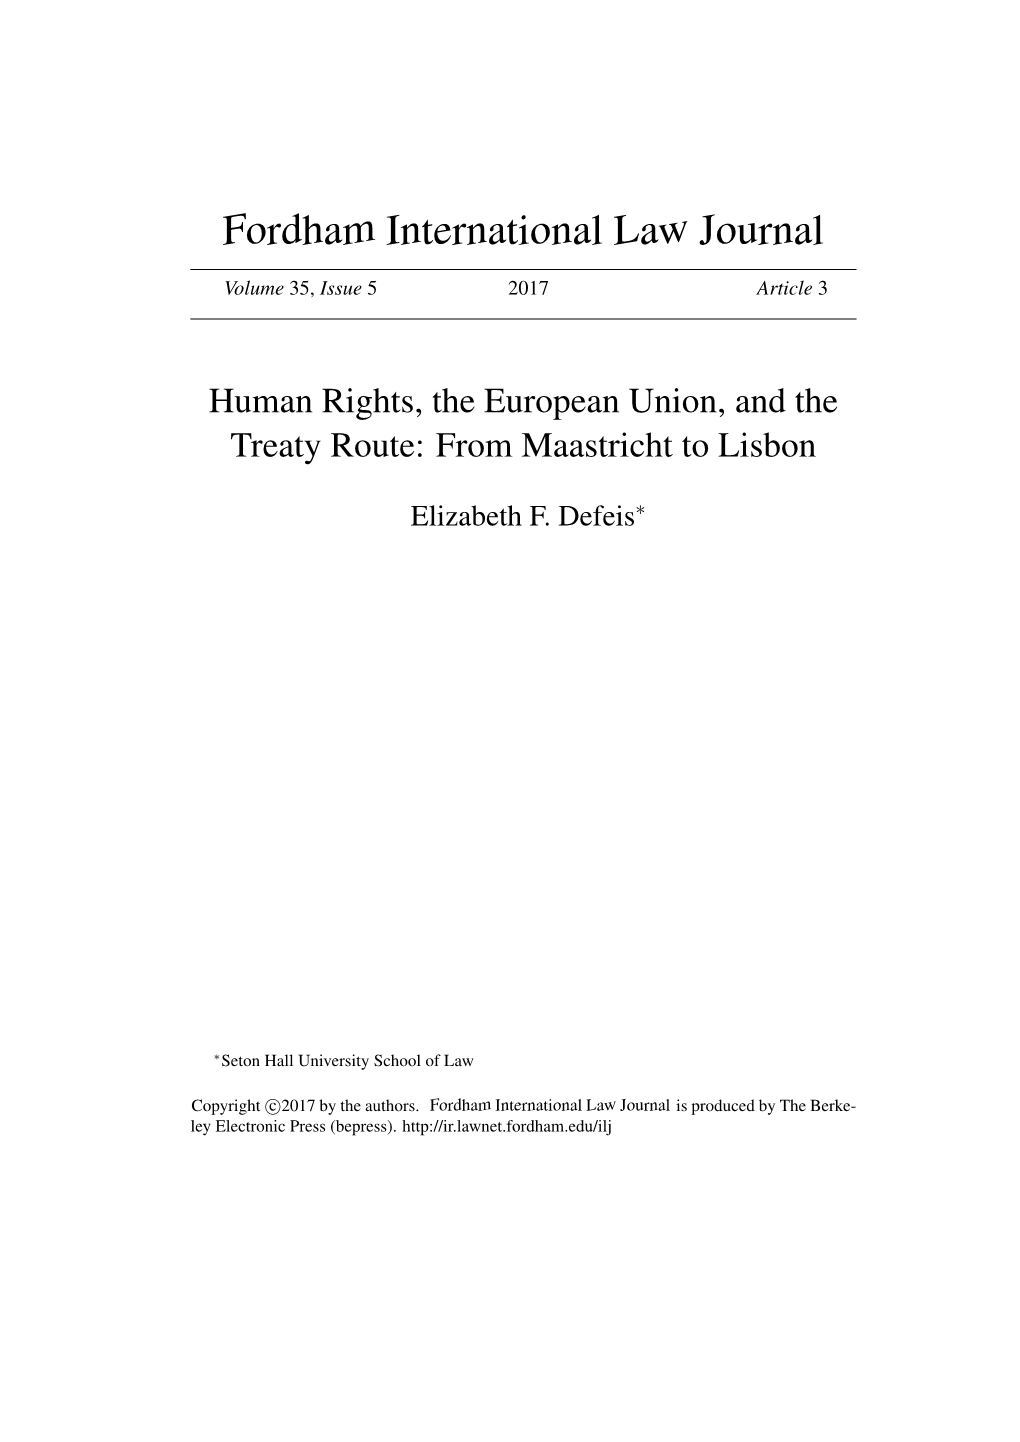 Human Rights, the European Union, and the Treaty Route: from Maastricht to Lisbon